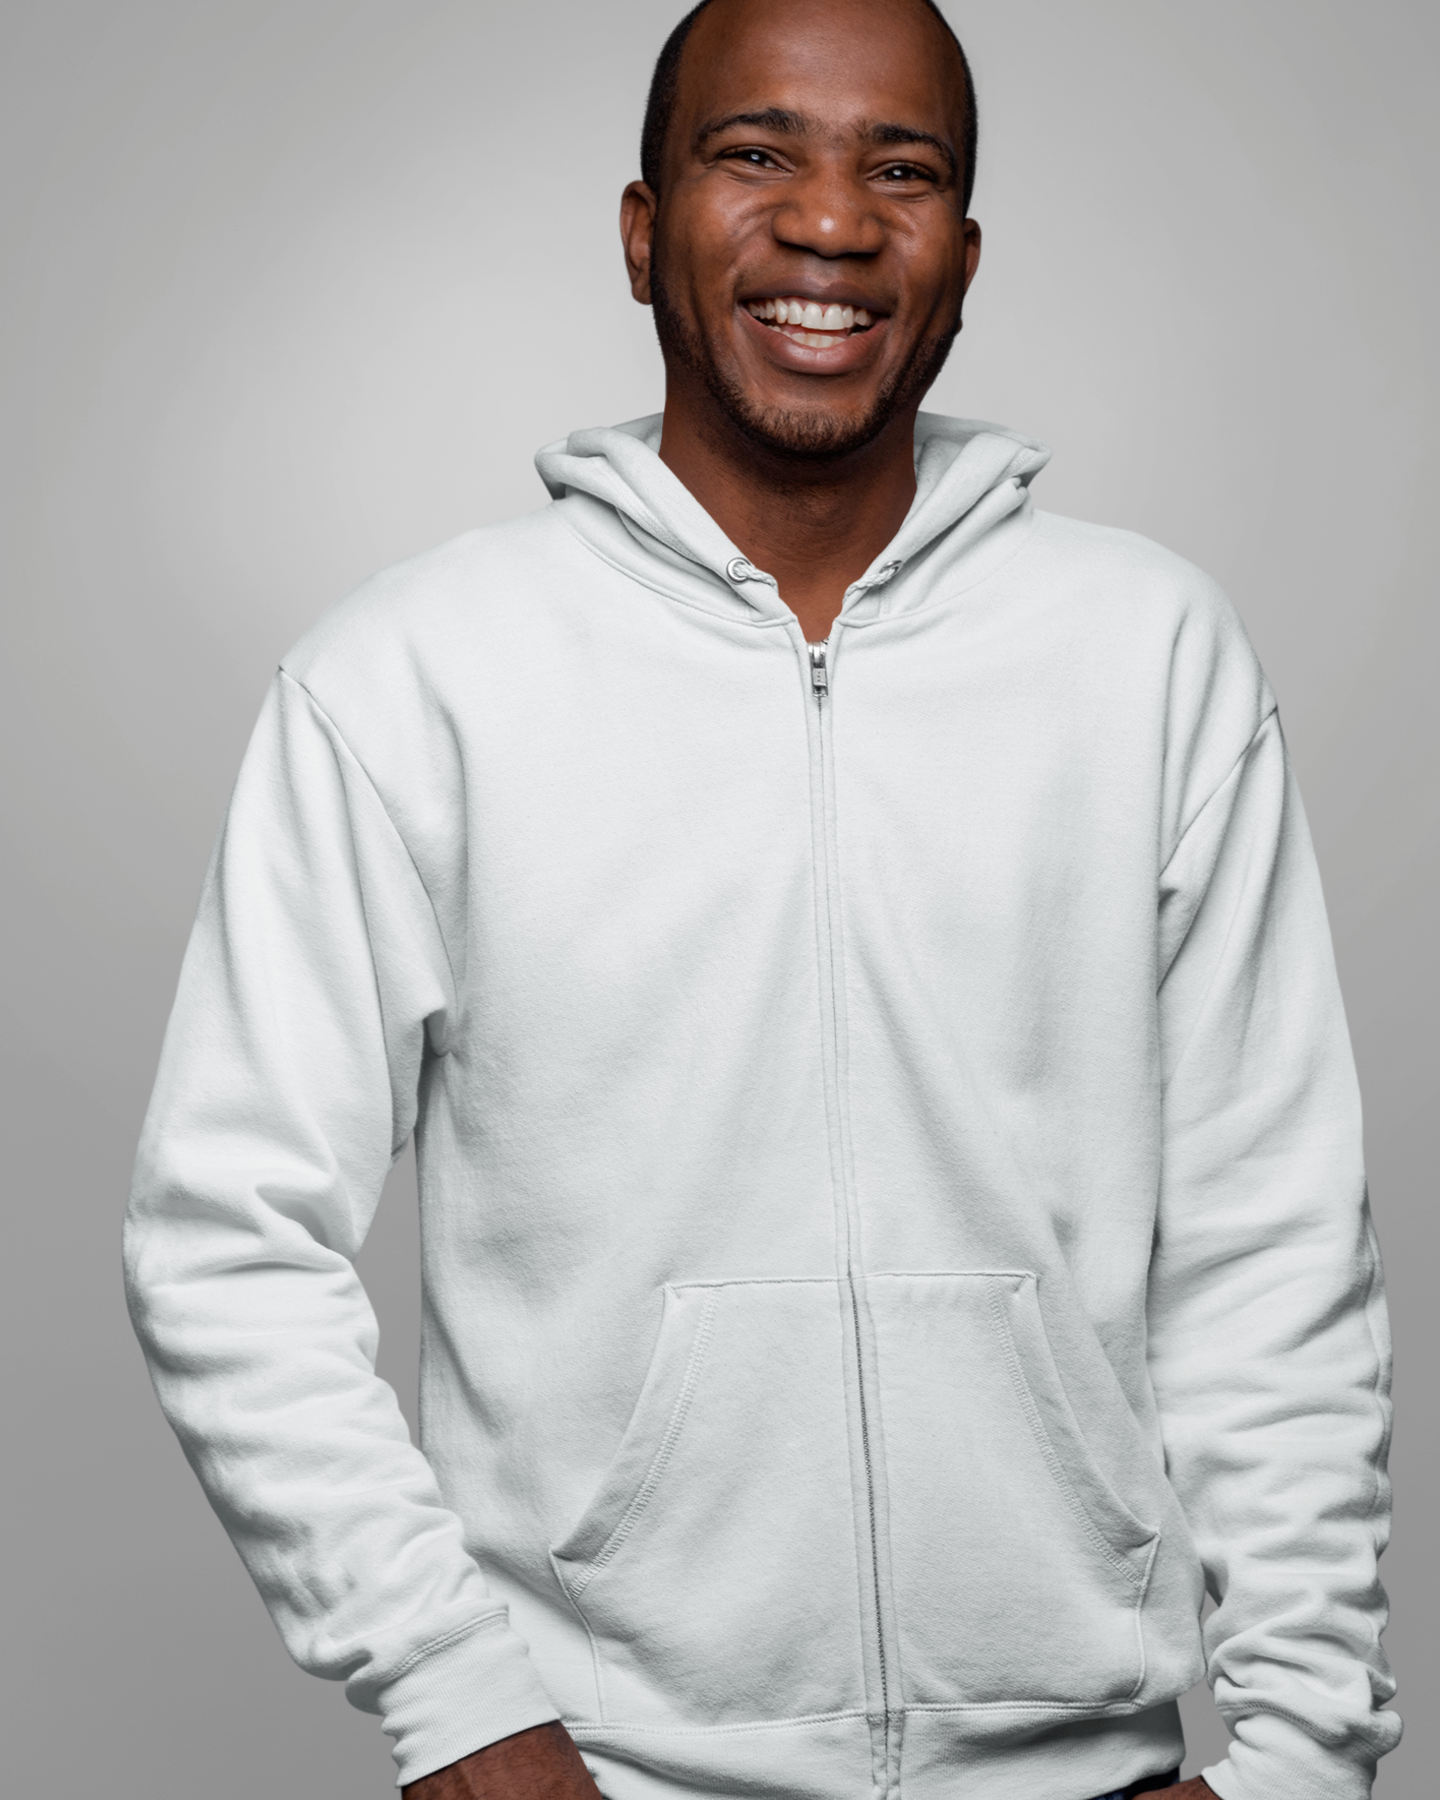 front view of a happy model wearing a white zip up hoodie